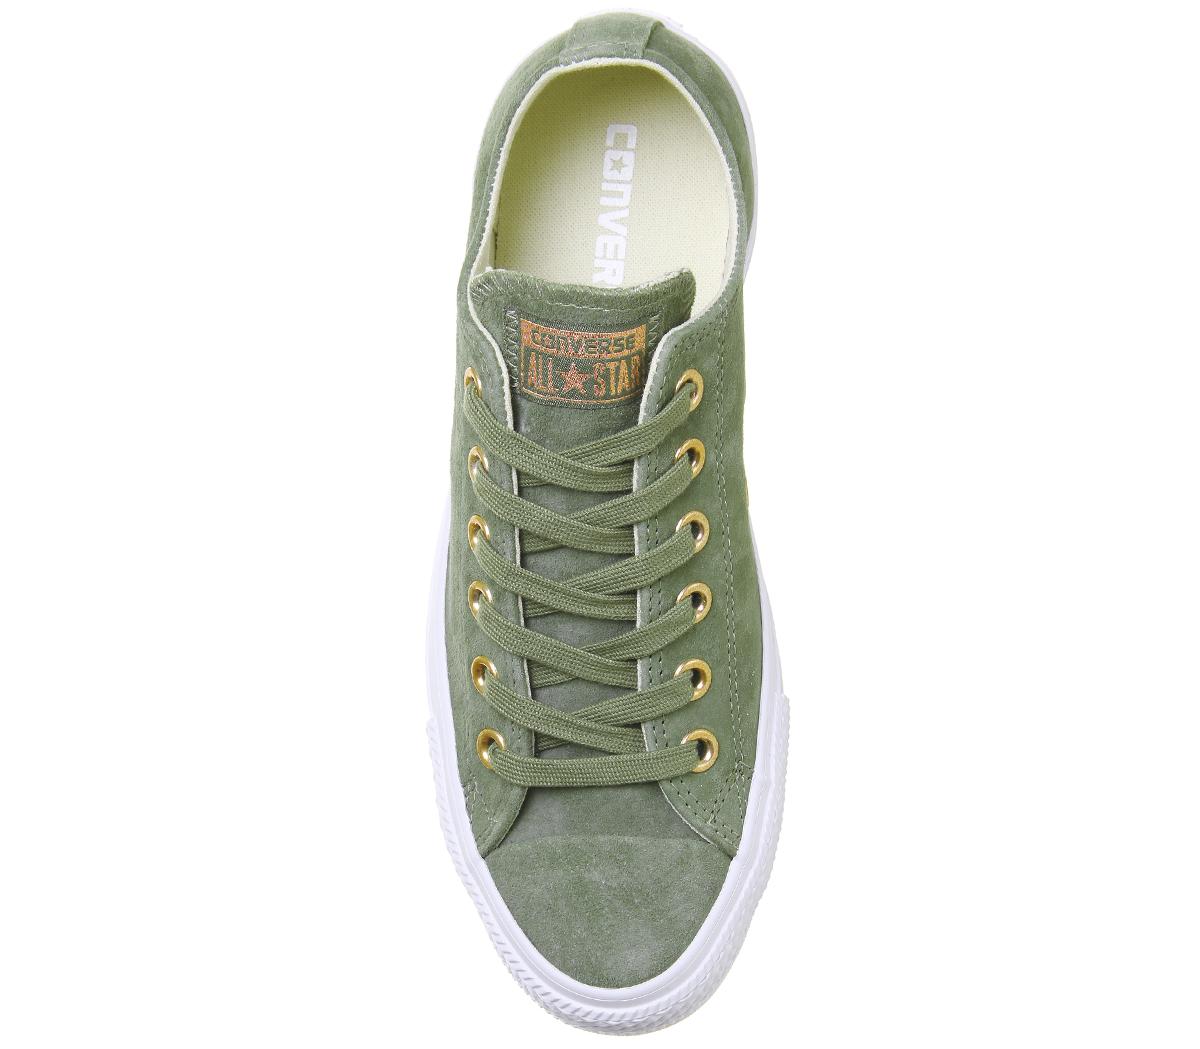 converse all star low leather fatigue green blush gold exclusive Off 62% -  www.loverethymno.com